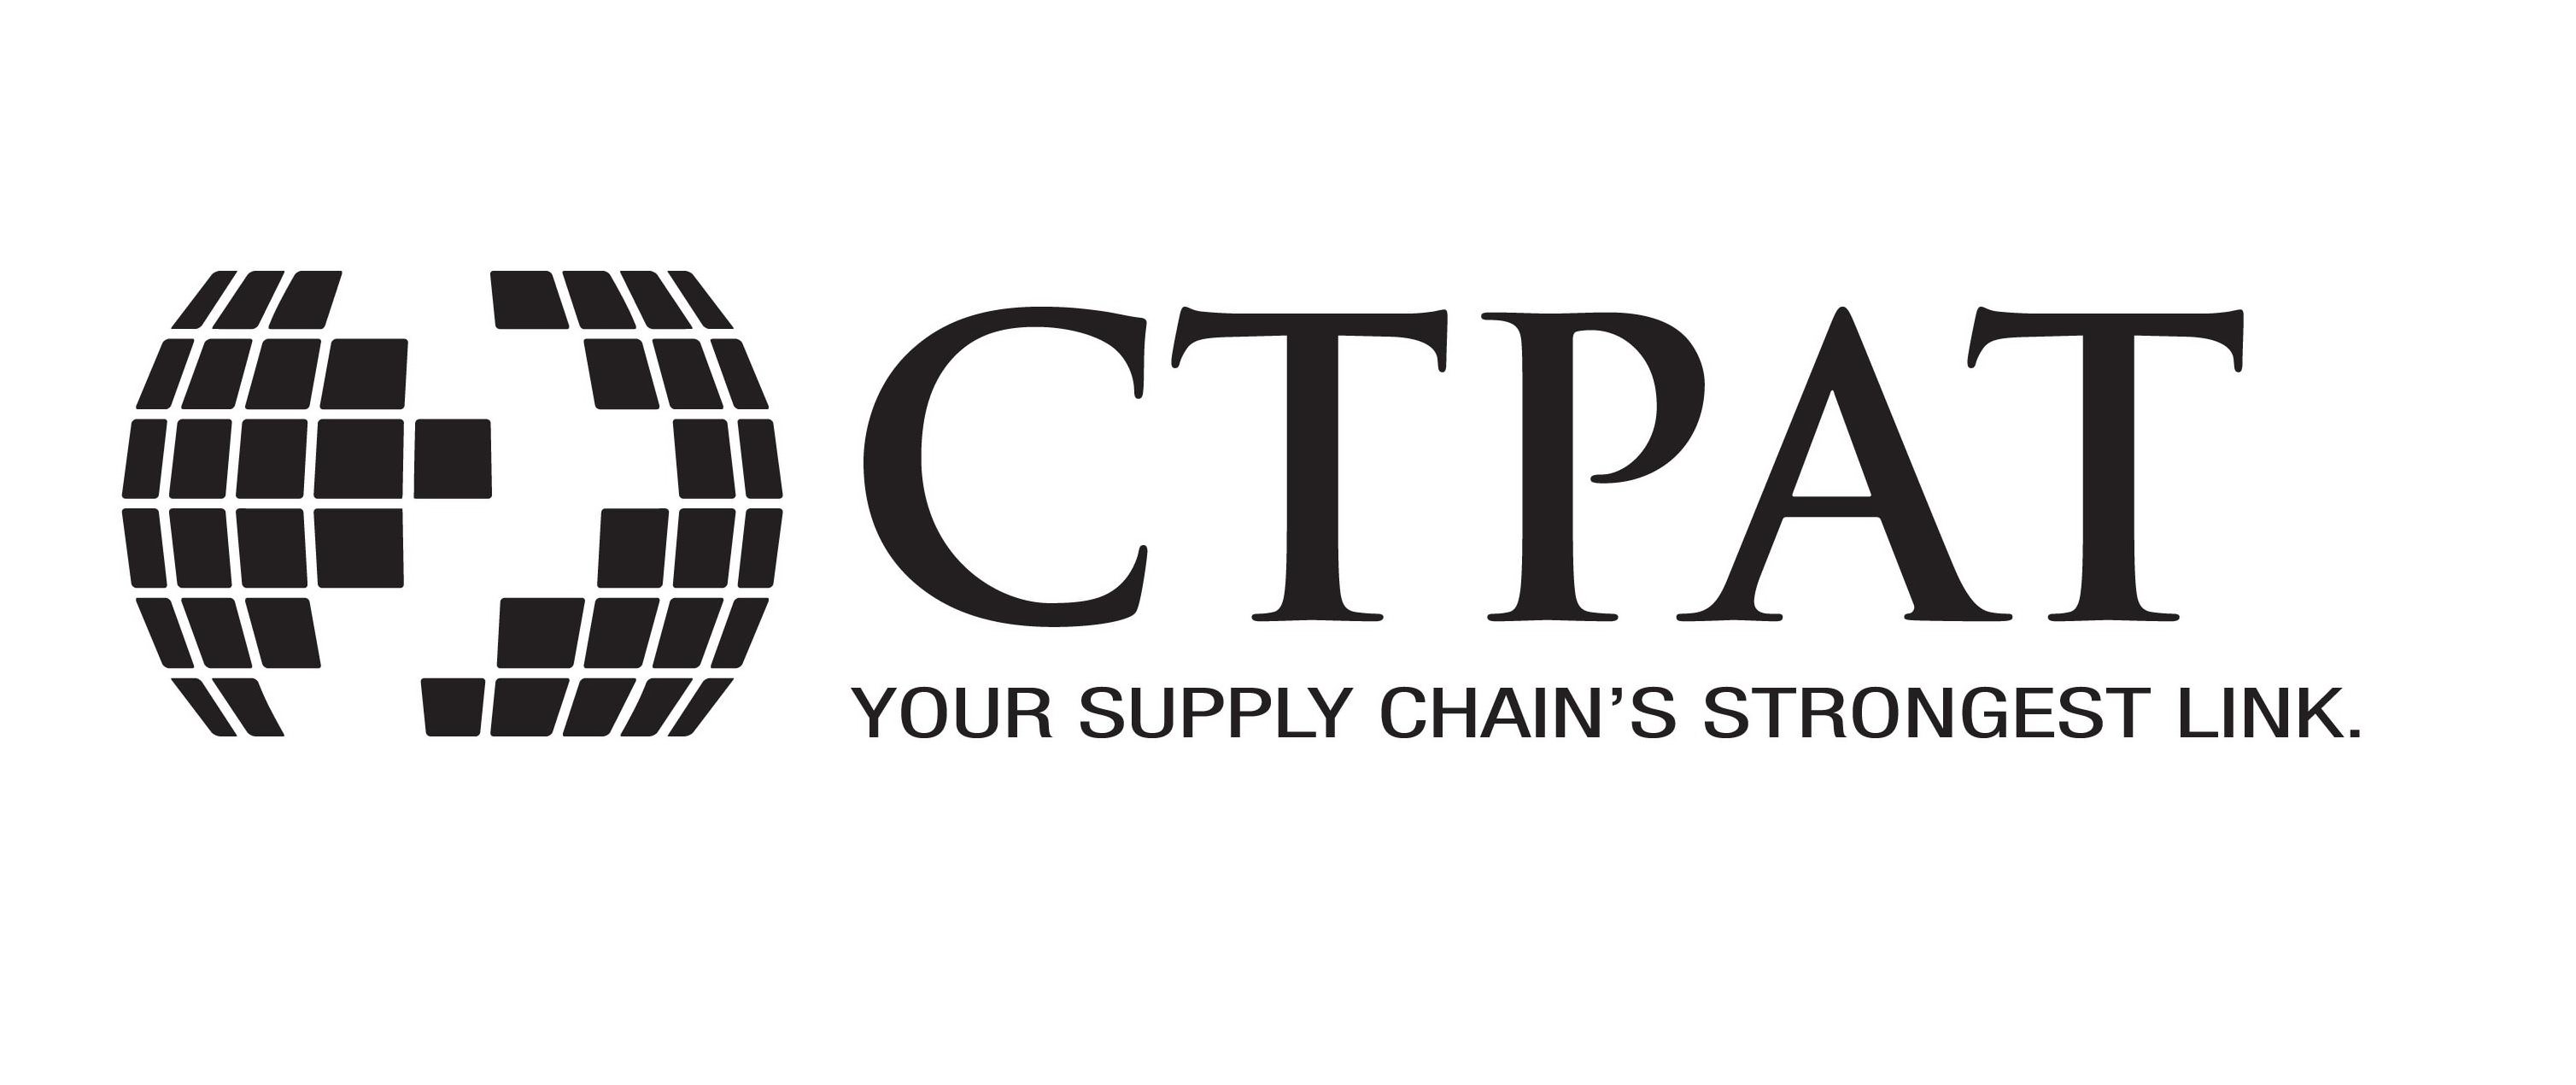  CTPAT YOUR SUPPLY CHAIN'S STRONGEST LINK.